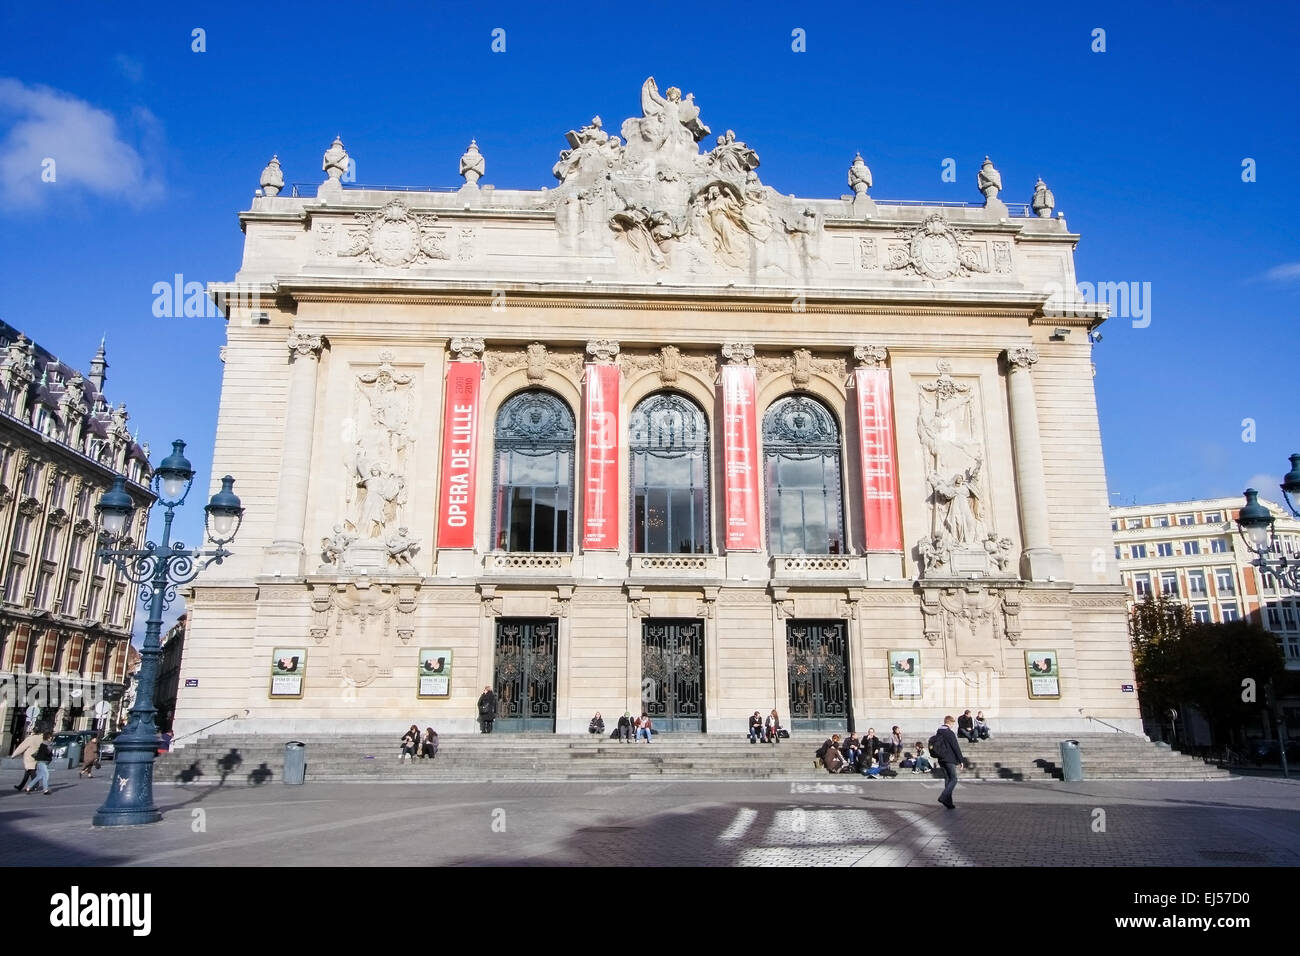 LILLE, FRANCE - NOVEMBER 2, 2009: View on the Opera Building in the center of Lille, France. Stock Photo